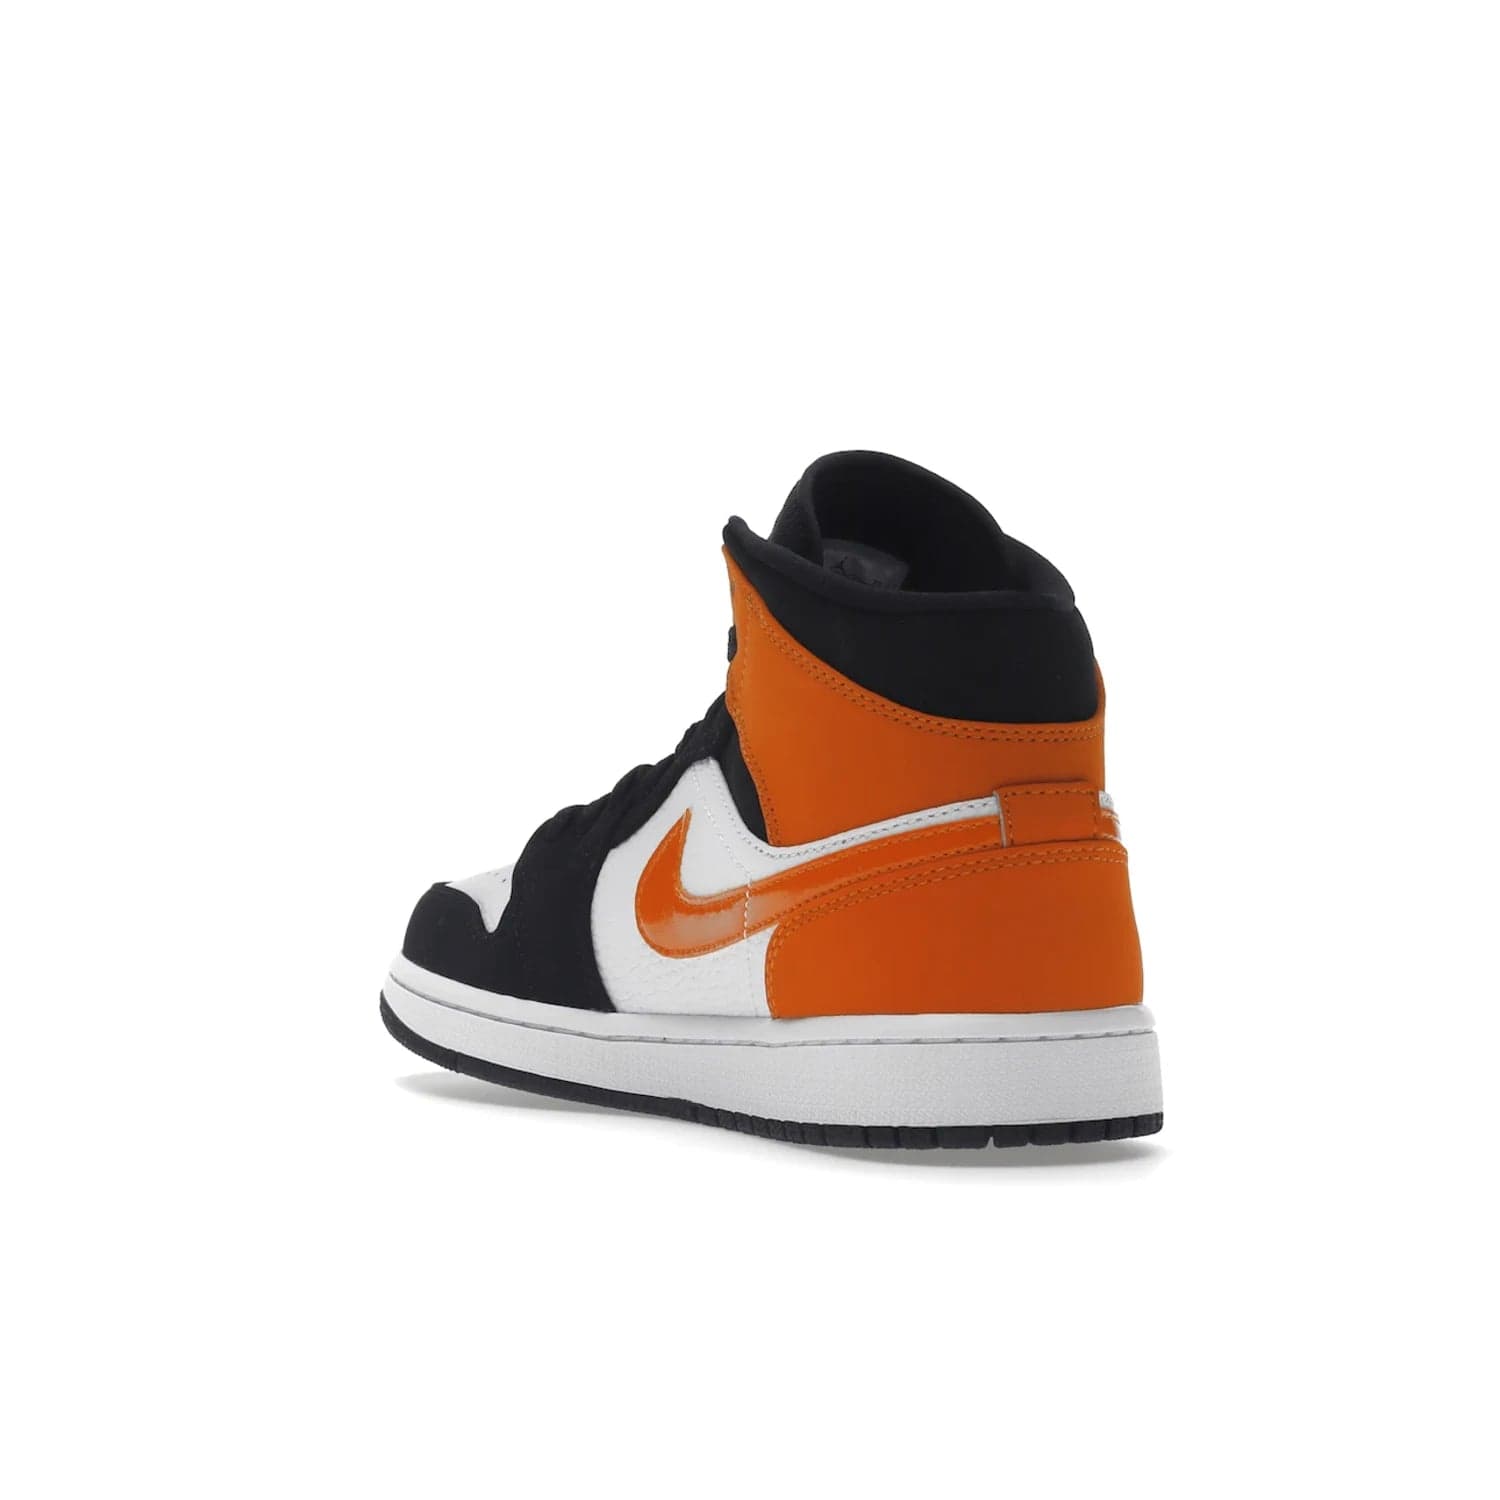 Jordan 1 Mid Shattered Backboard - Image 25 - Only at www.BallersClubKickz.com - The Air Jordan 1 Mid Shattered Backboard offers a timeless Black/White-Starfish colorway. Classic Swoosh logo and AJ insignia plus a shatterd backboard graphic on the insole. Get your pair today!